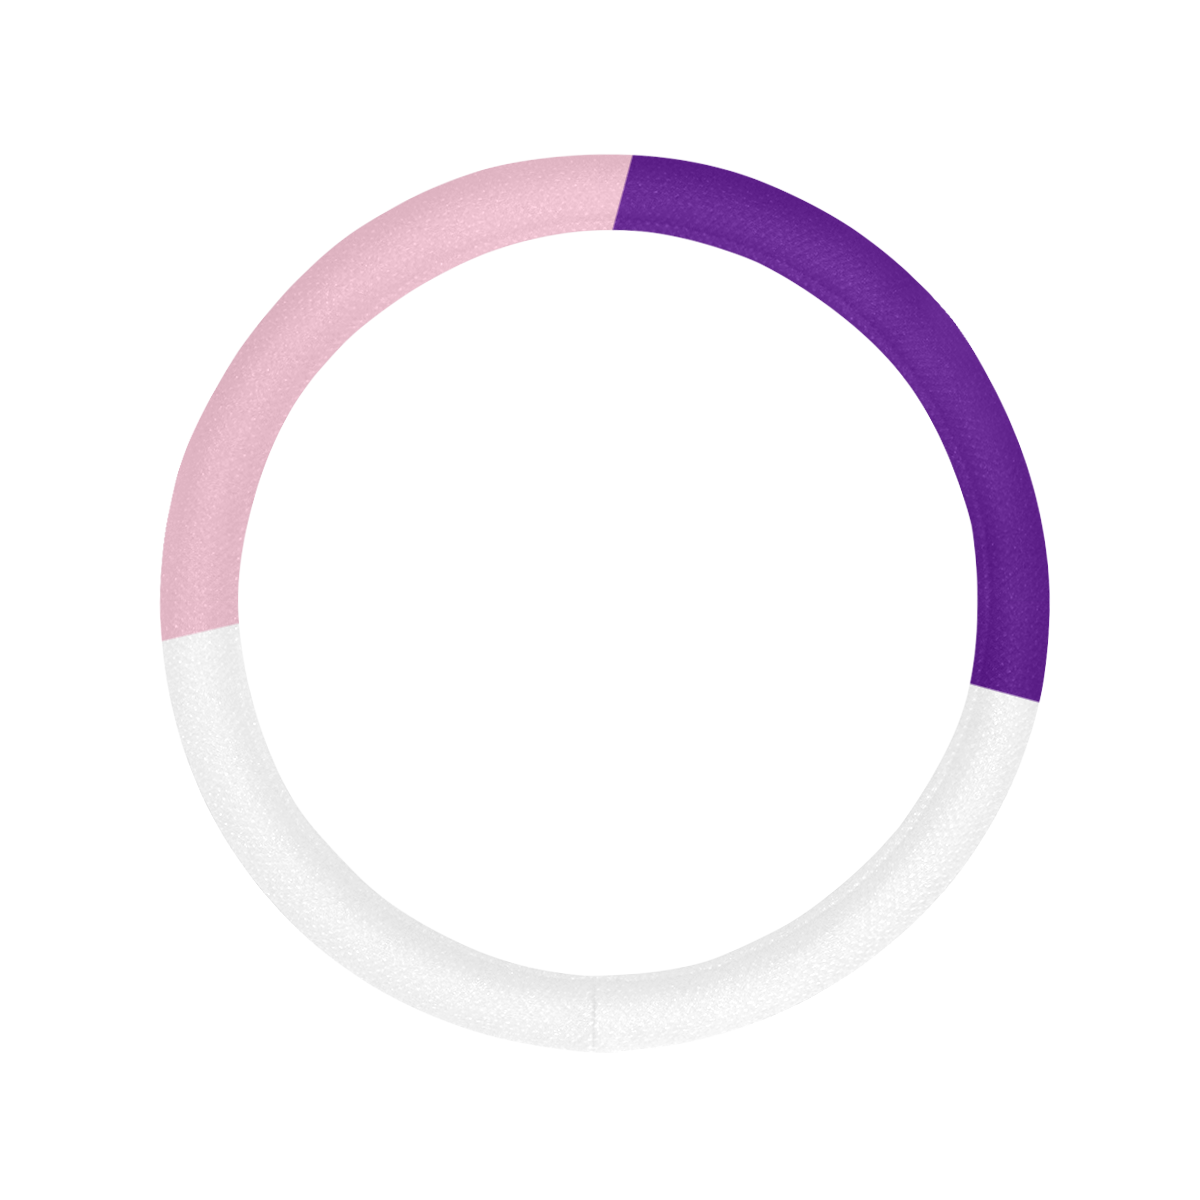 Textured circle with pink, purple, and white segments.